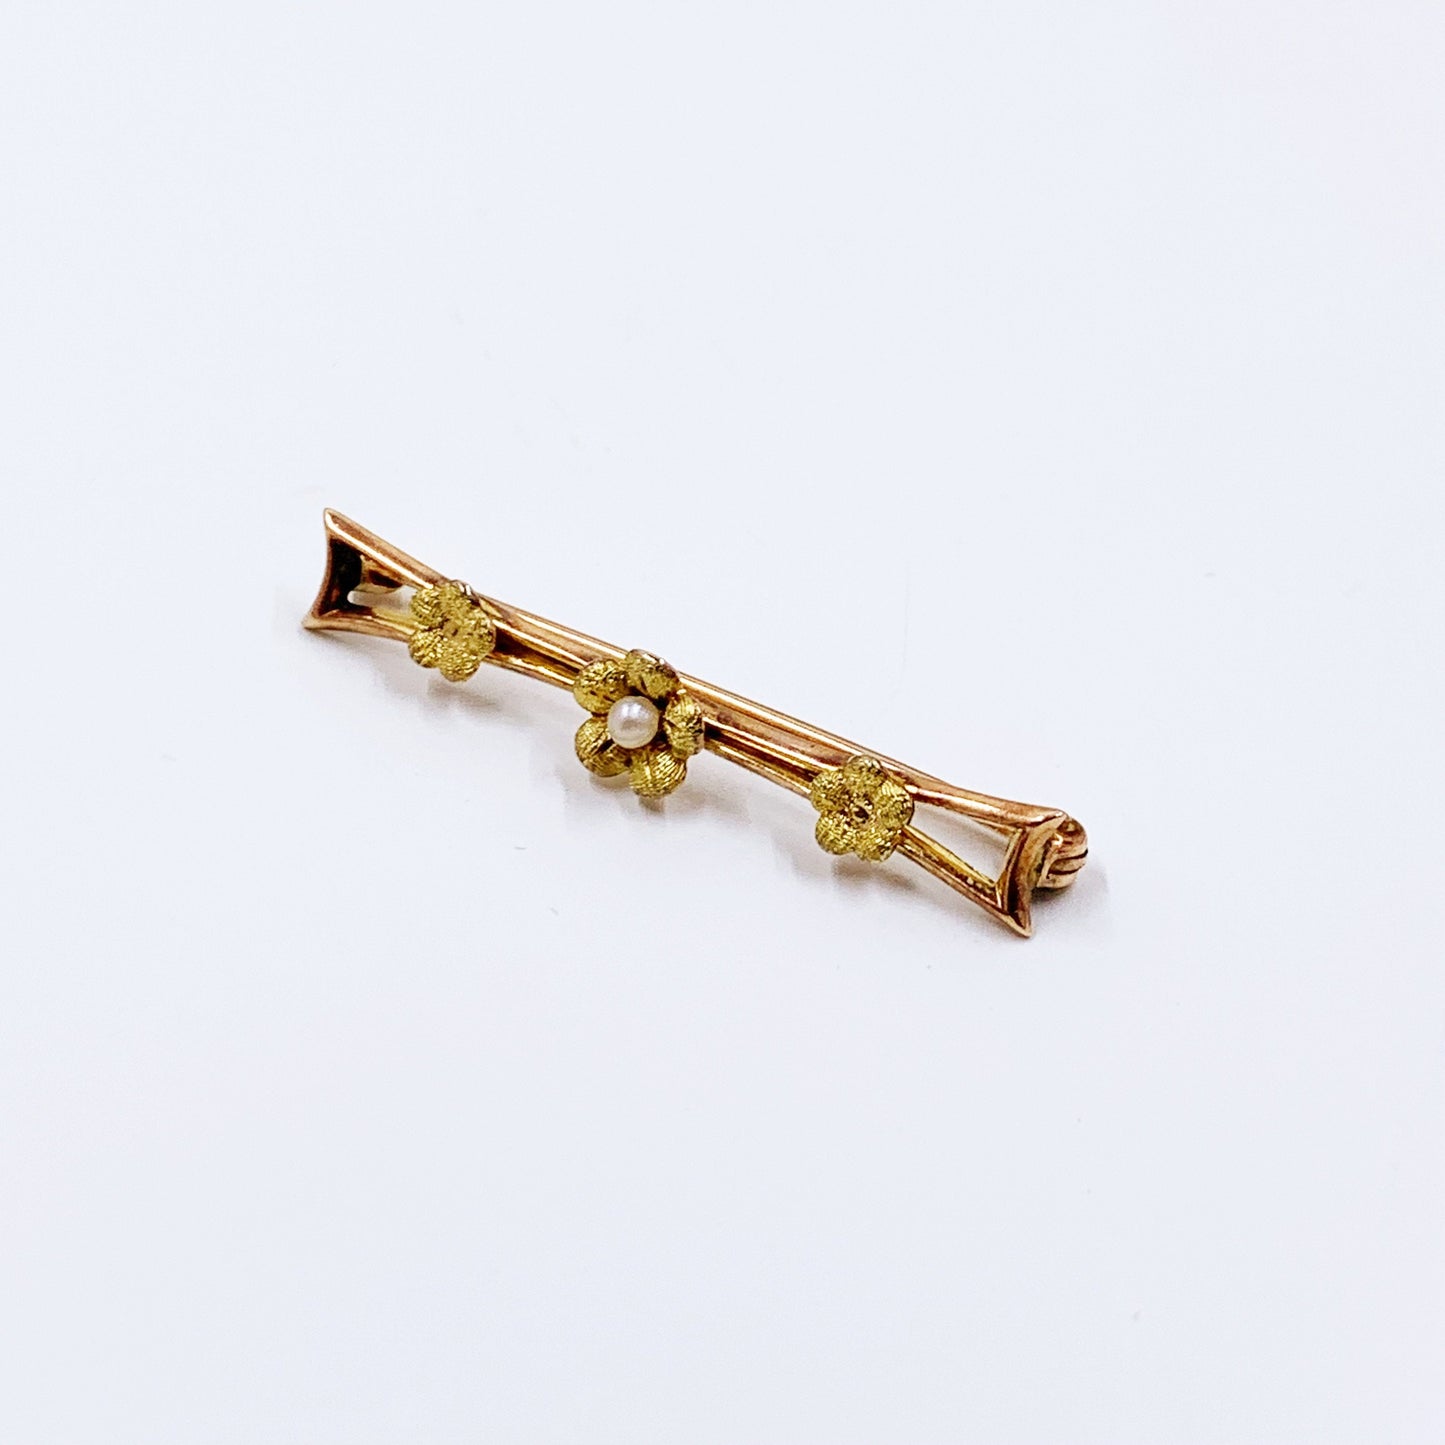 Victorian 10k Gold Floral Seed Pearl Brooch